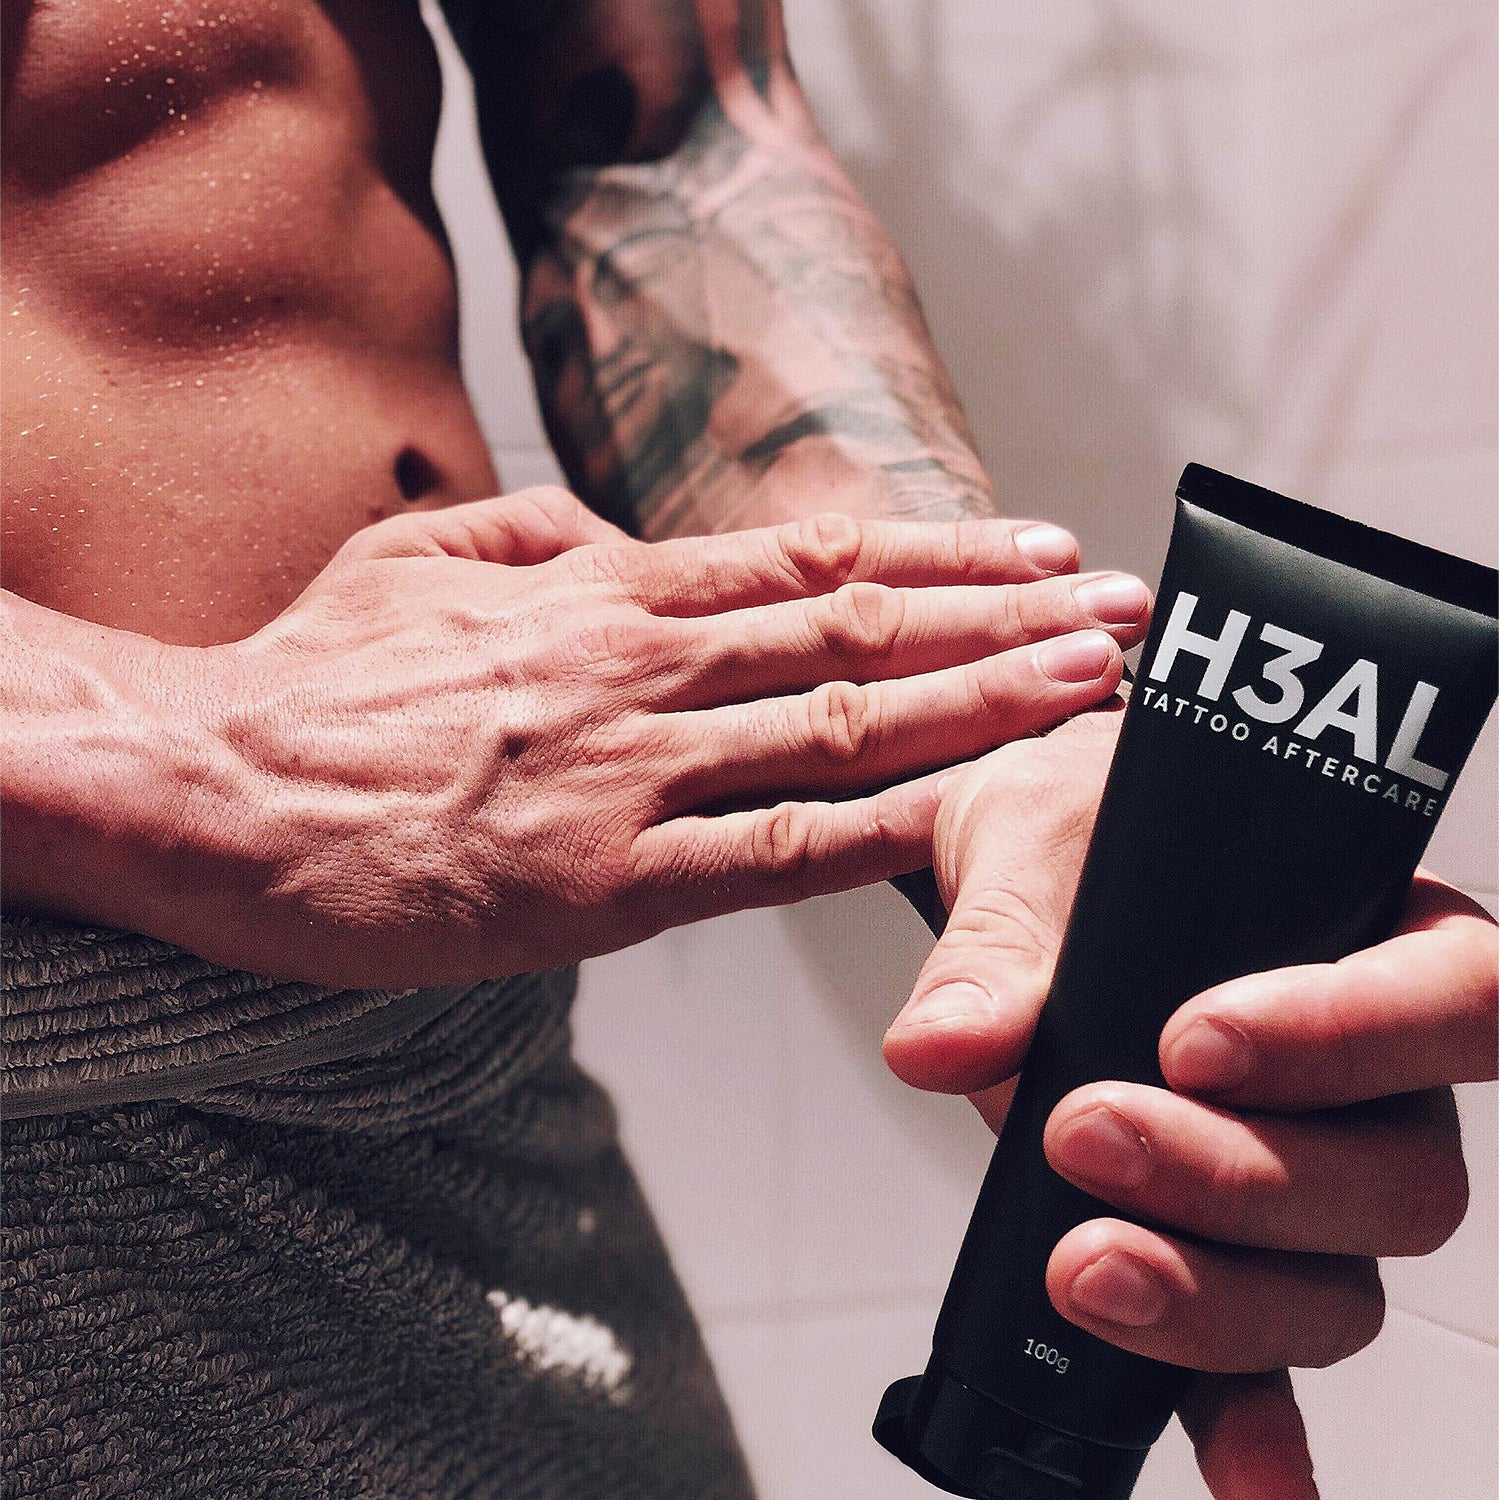 H3al Tattoo Aftercare